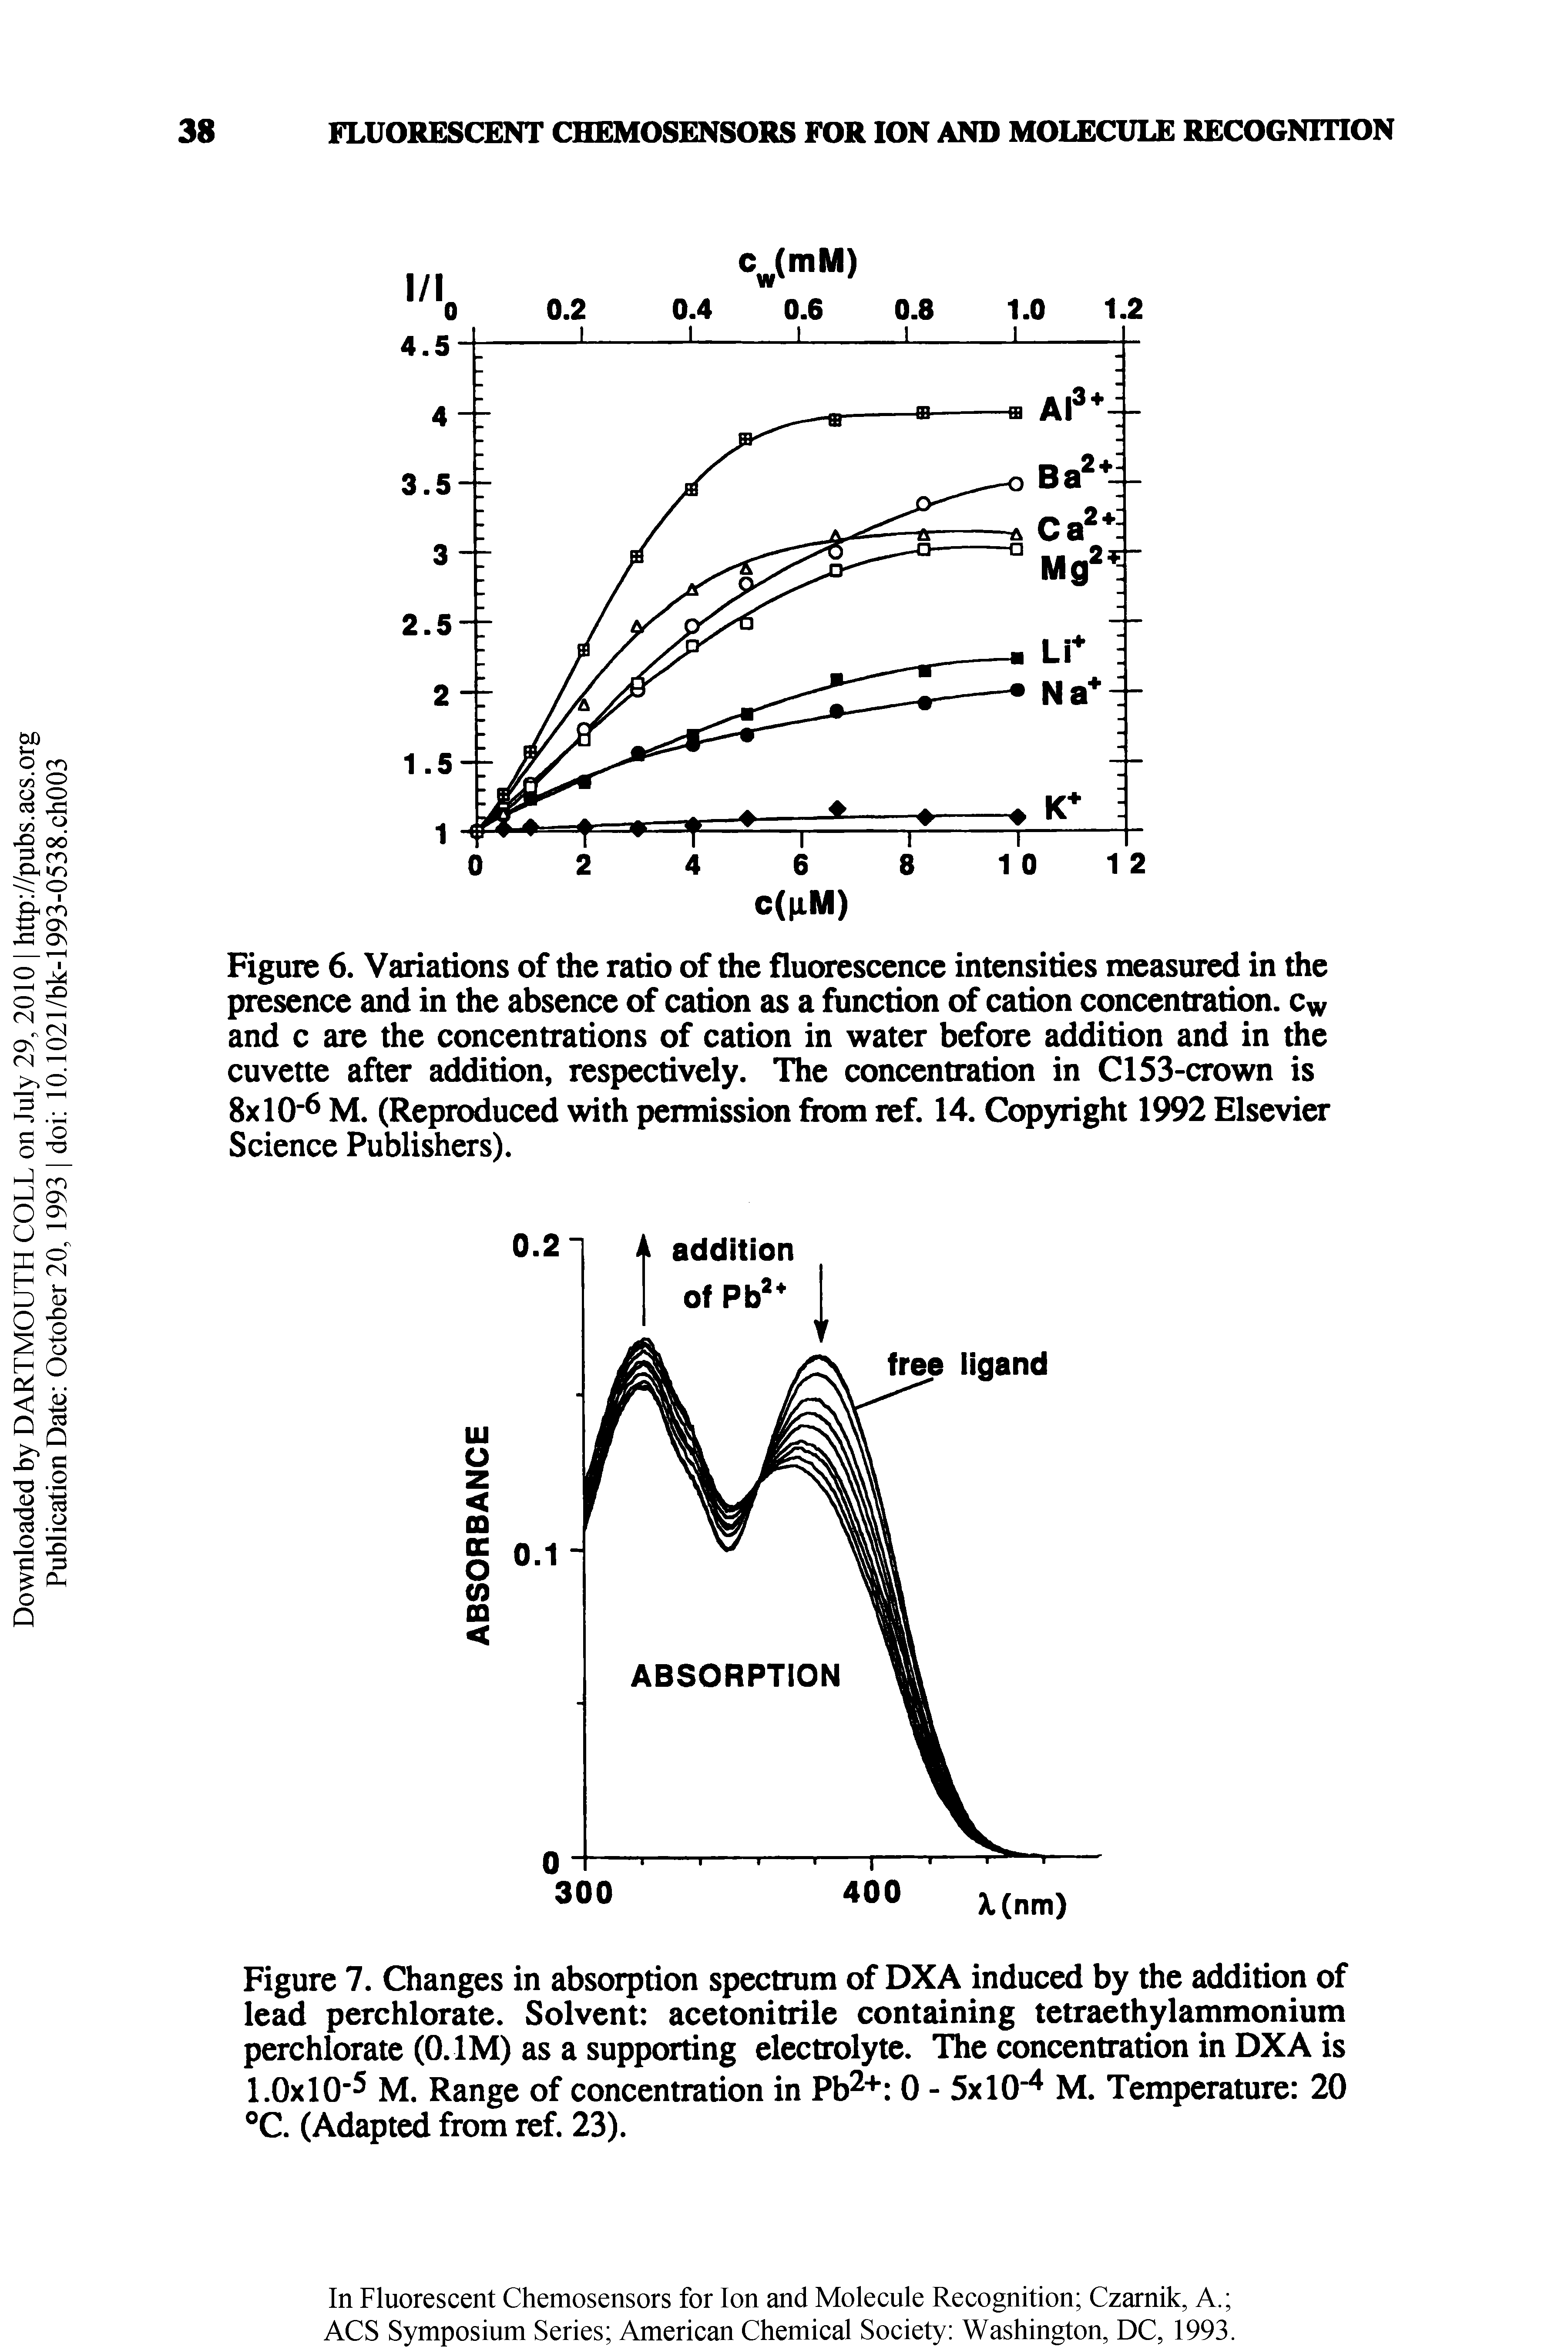 Figure 7. Changes in absorption spectrum of DXA induced by the addition of lead perchlorate. Solvent acetonitrile containing tetraethylammonium perchlorate (O.IM) as a supporting electrolyte. The concentration in DXA is 1.0x10" M. Range of concentration in Pb + 0 - 5x10" M. Temperature 20 C. (Adapted from ref. 23).